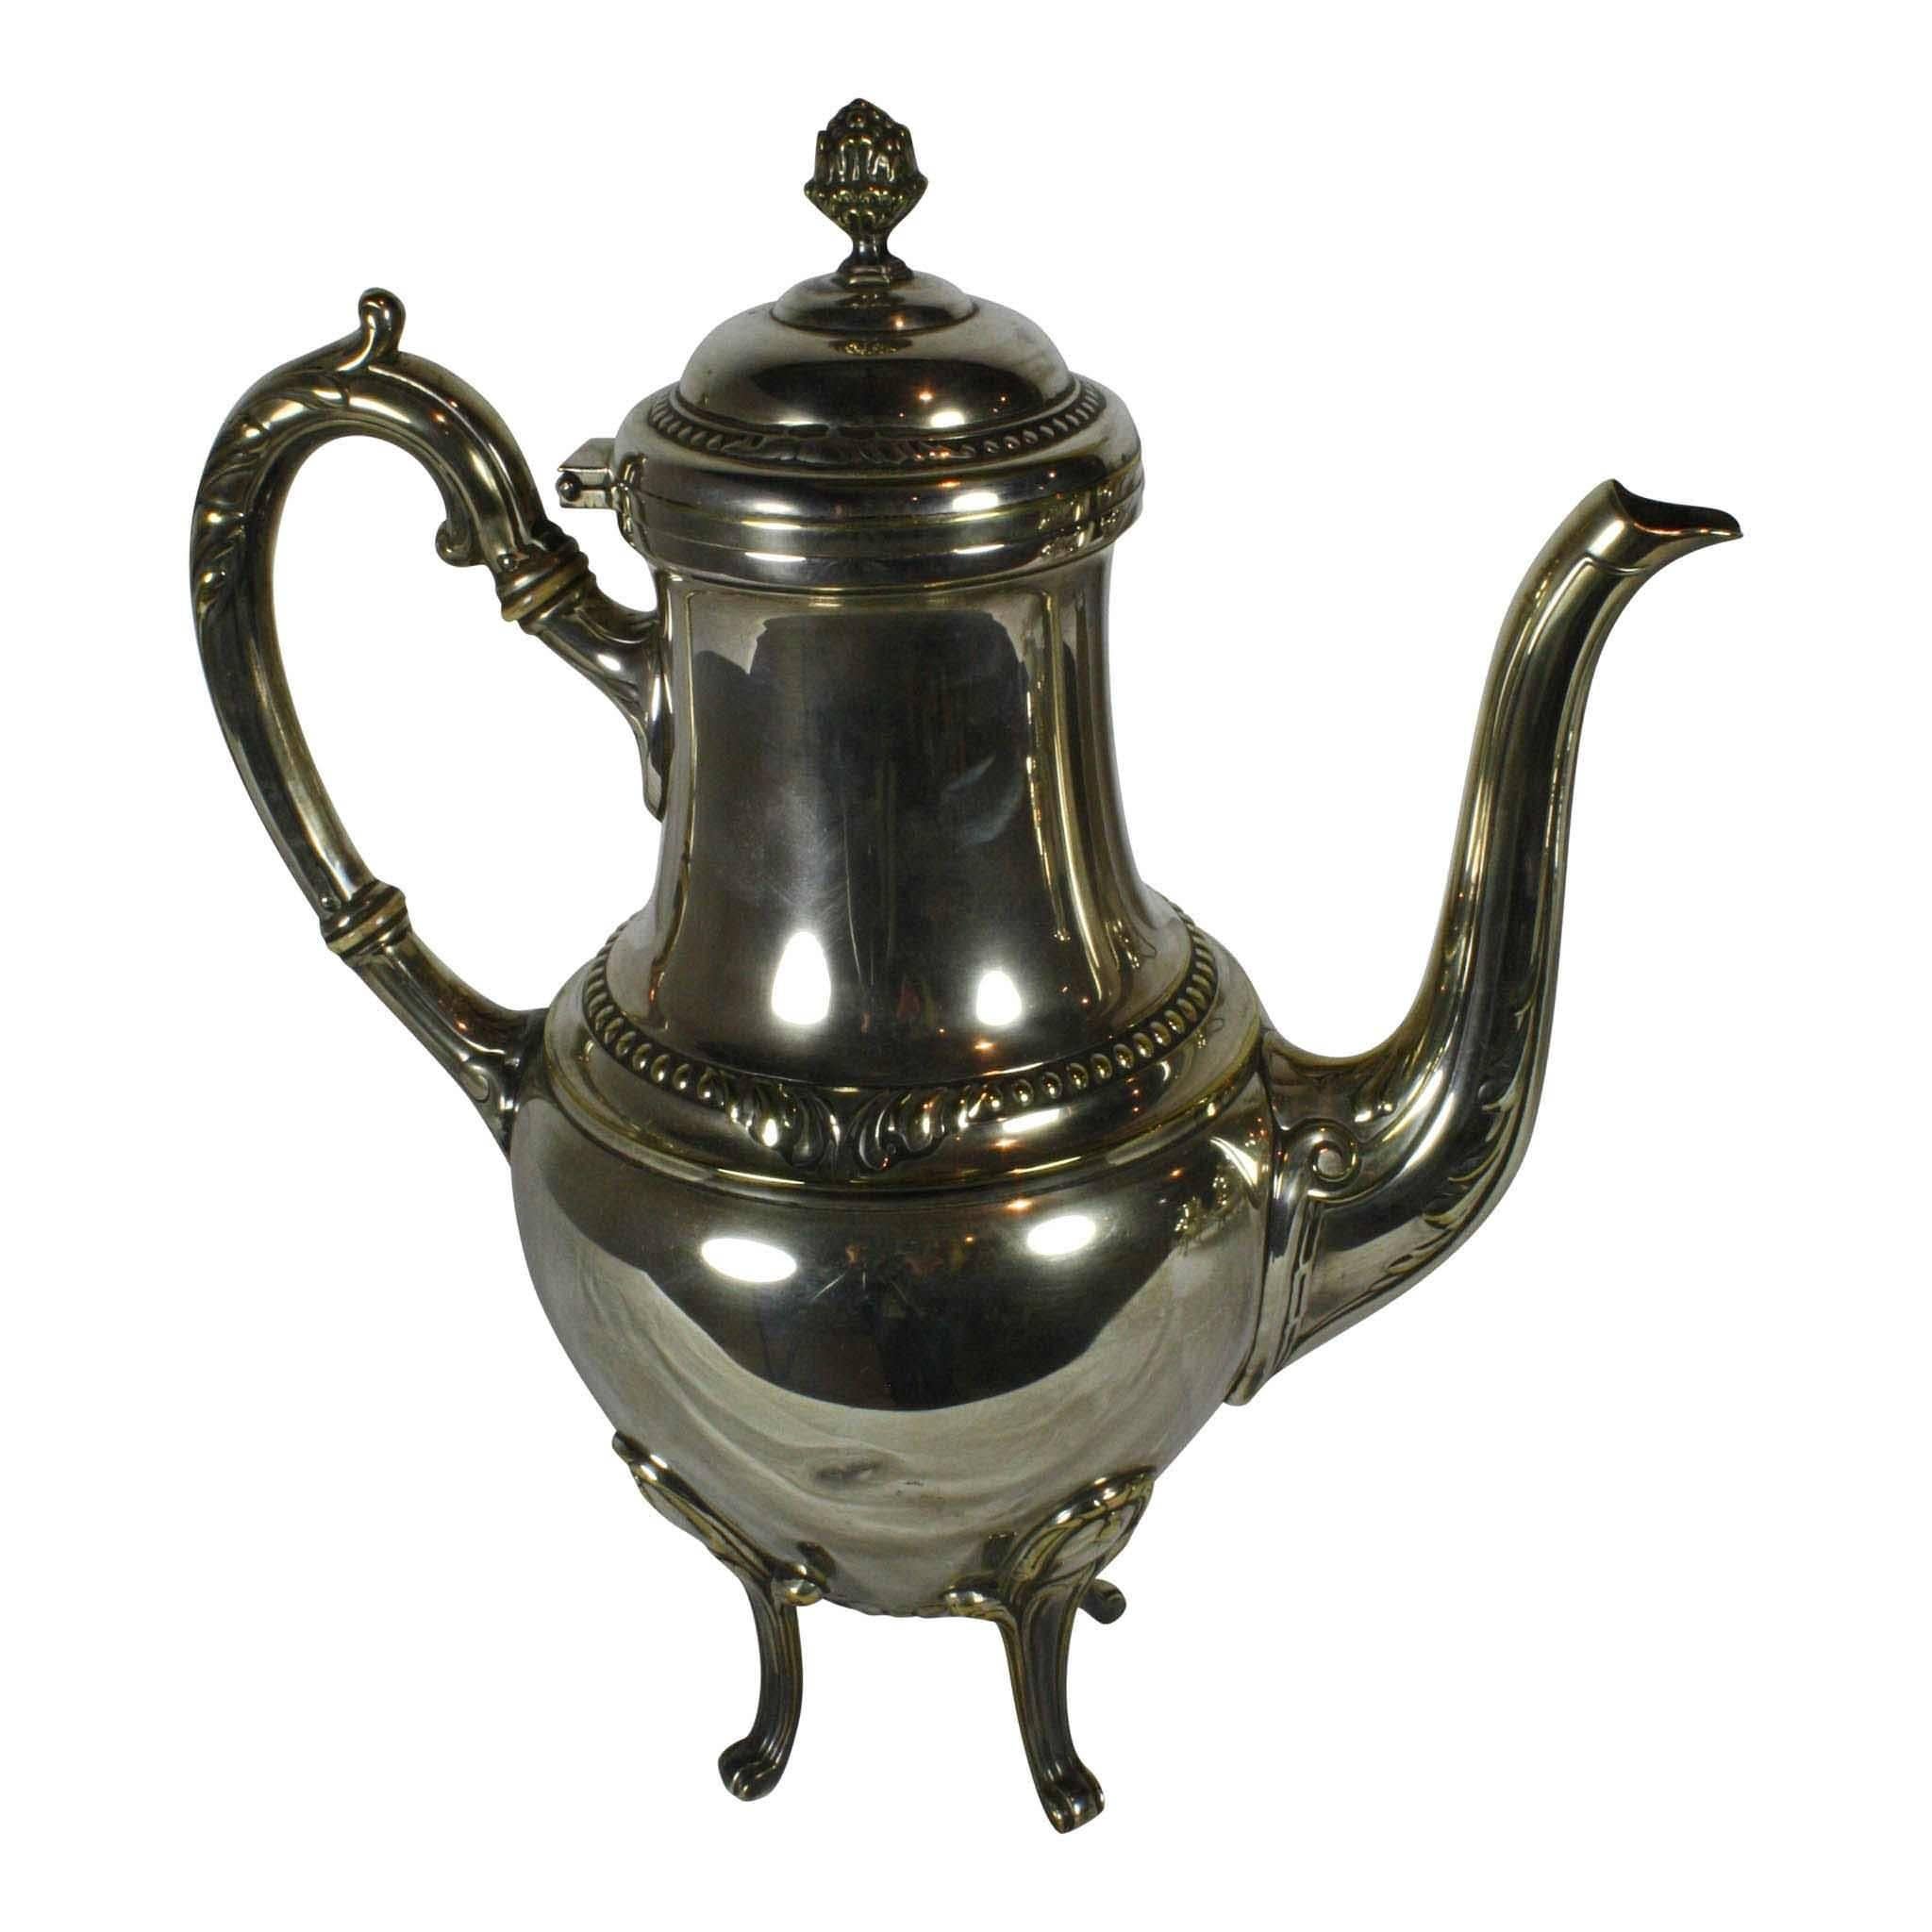 This complete five piece coffee and tea set is silver plated. Acanthus leaves are feature on all of the handles and the ceramic heat rings on are present and intact. All of the covers have matching decorative acorn finials. The coffee and tea pots